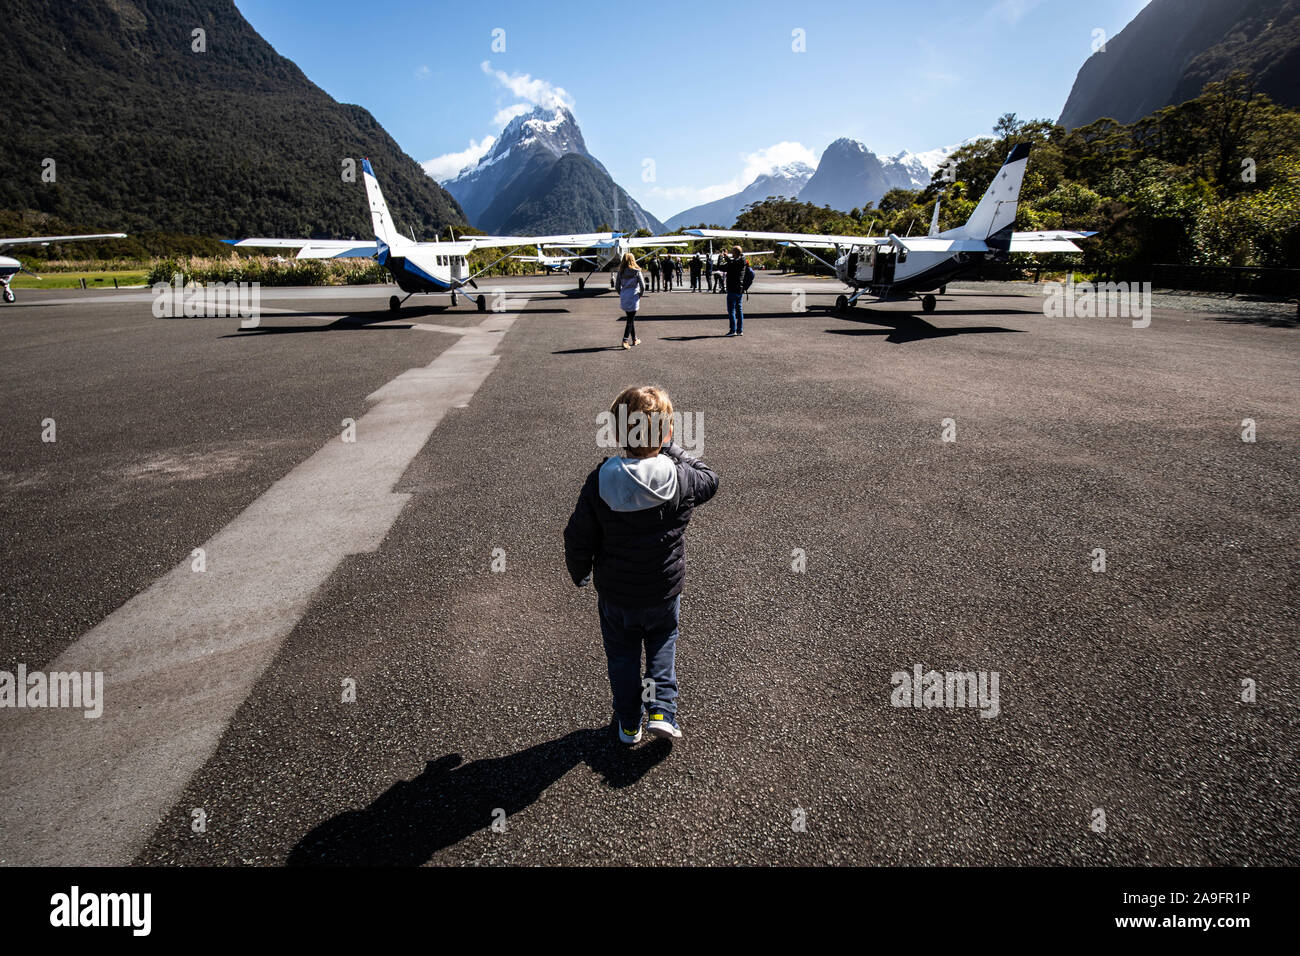 Little kid at airport runway with mountains in the back Stock Photo